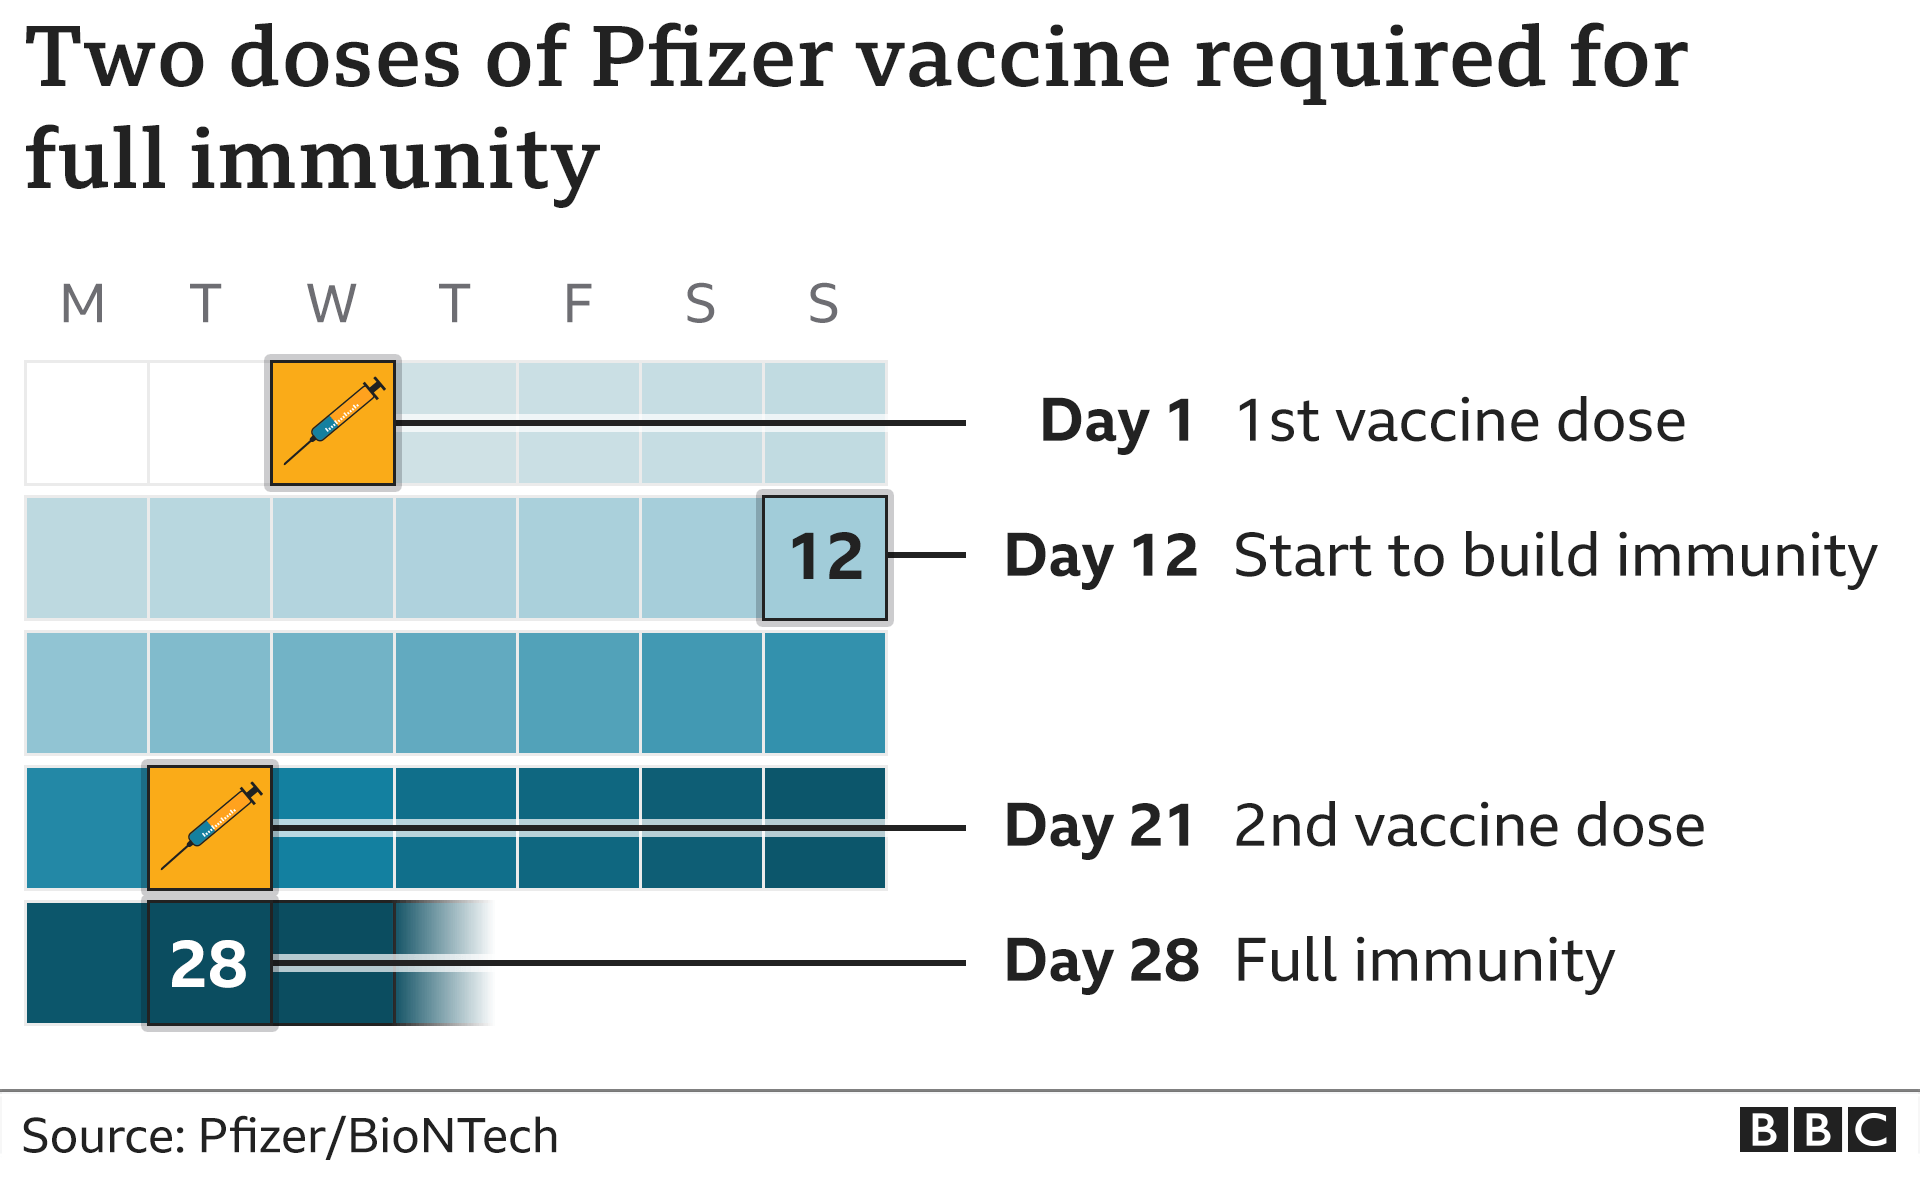 How the Pfizer vaccine requires two doses